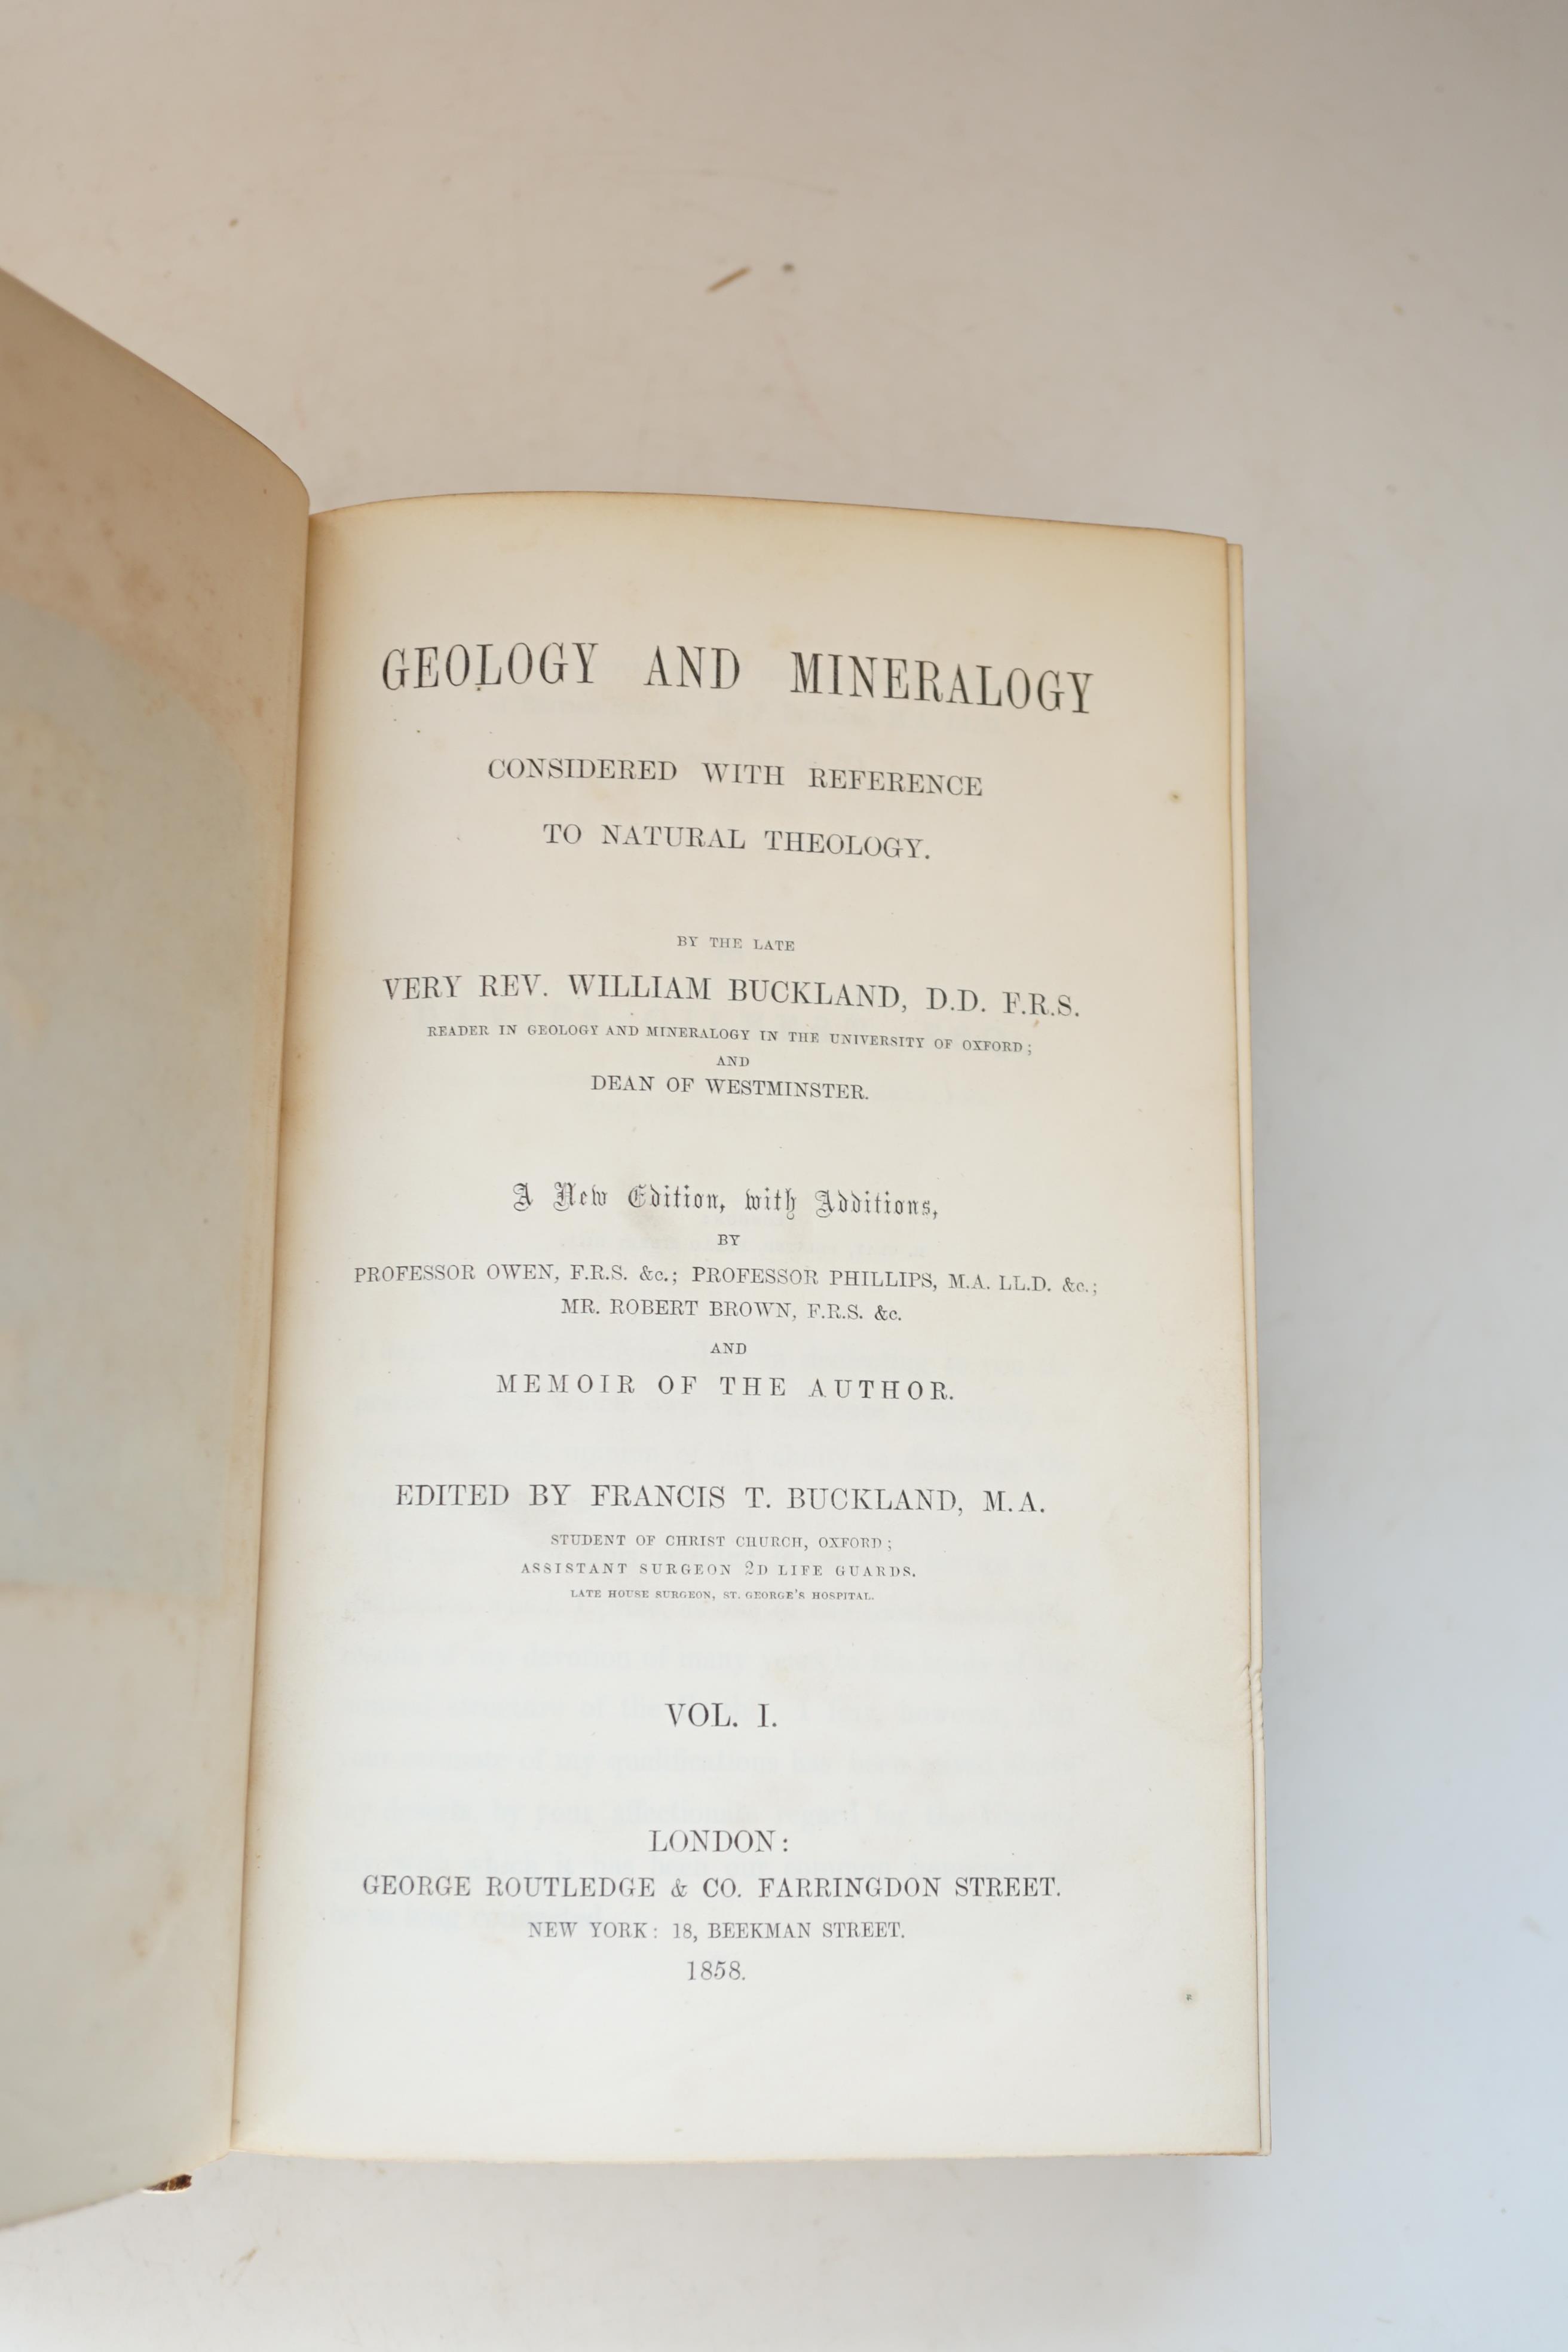 Buckland, William - Geology and Mineralogy Considered with Reference to Natural Theology, a New Addition, with additions by Professor Owen, Professor Phillips, Robert Brown and Memoir of the author, edited by Francis T.